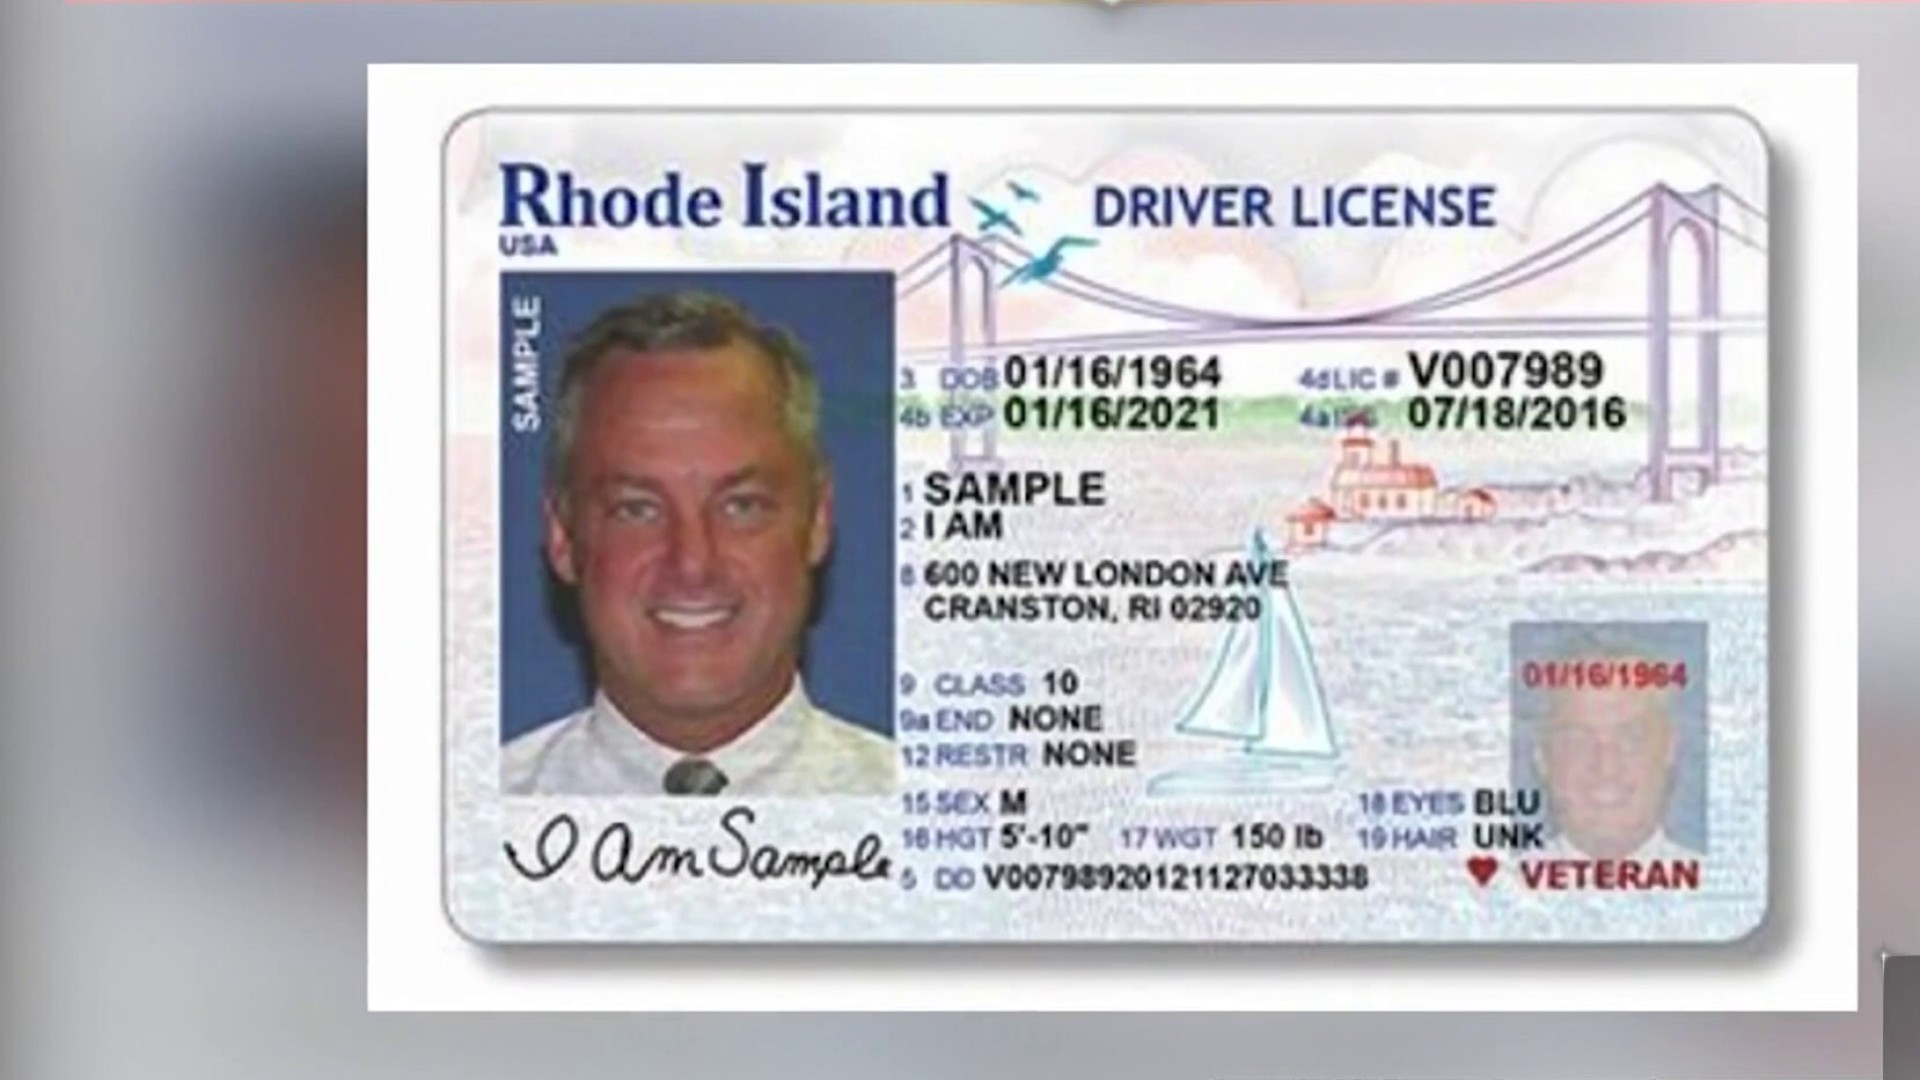 Undocumented people can now apply for driver's licenses in Rhode